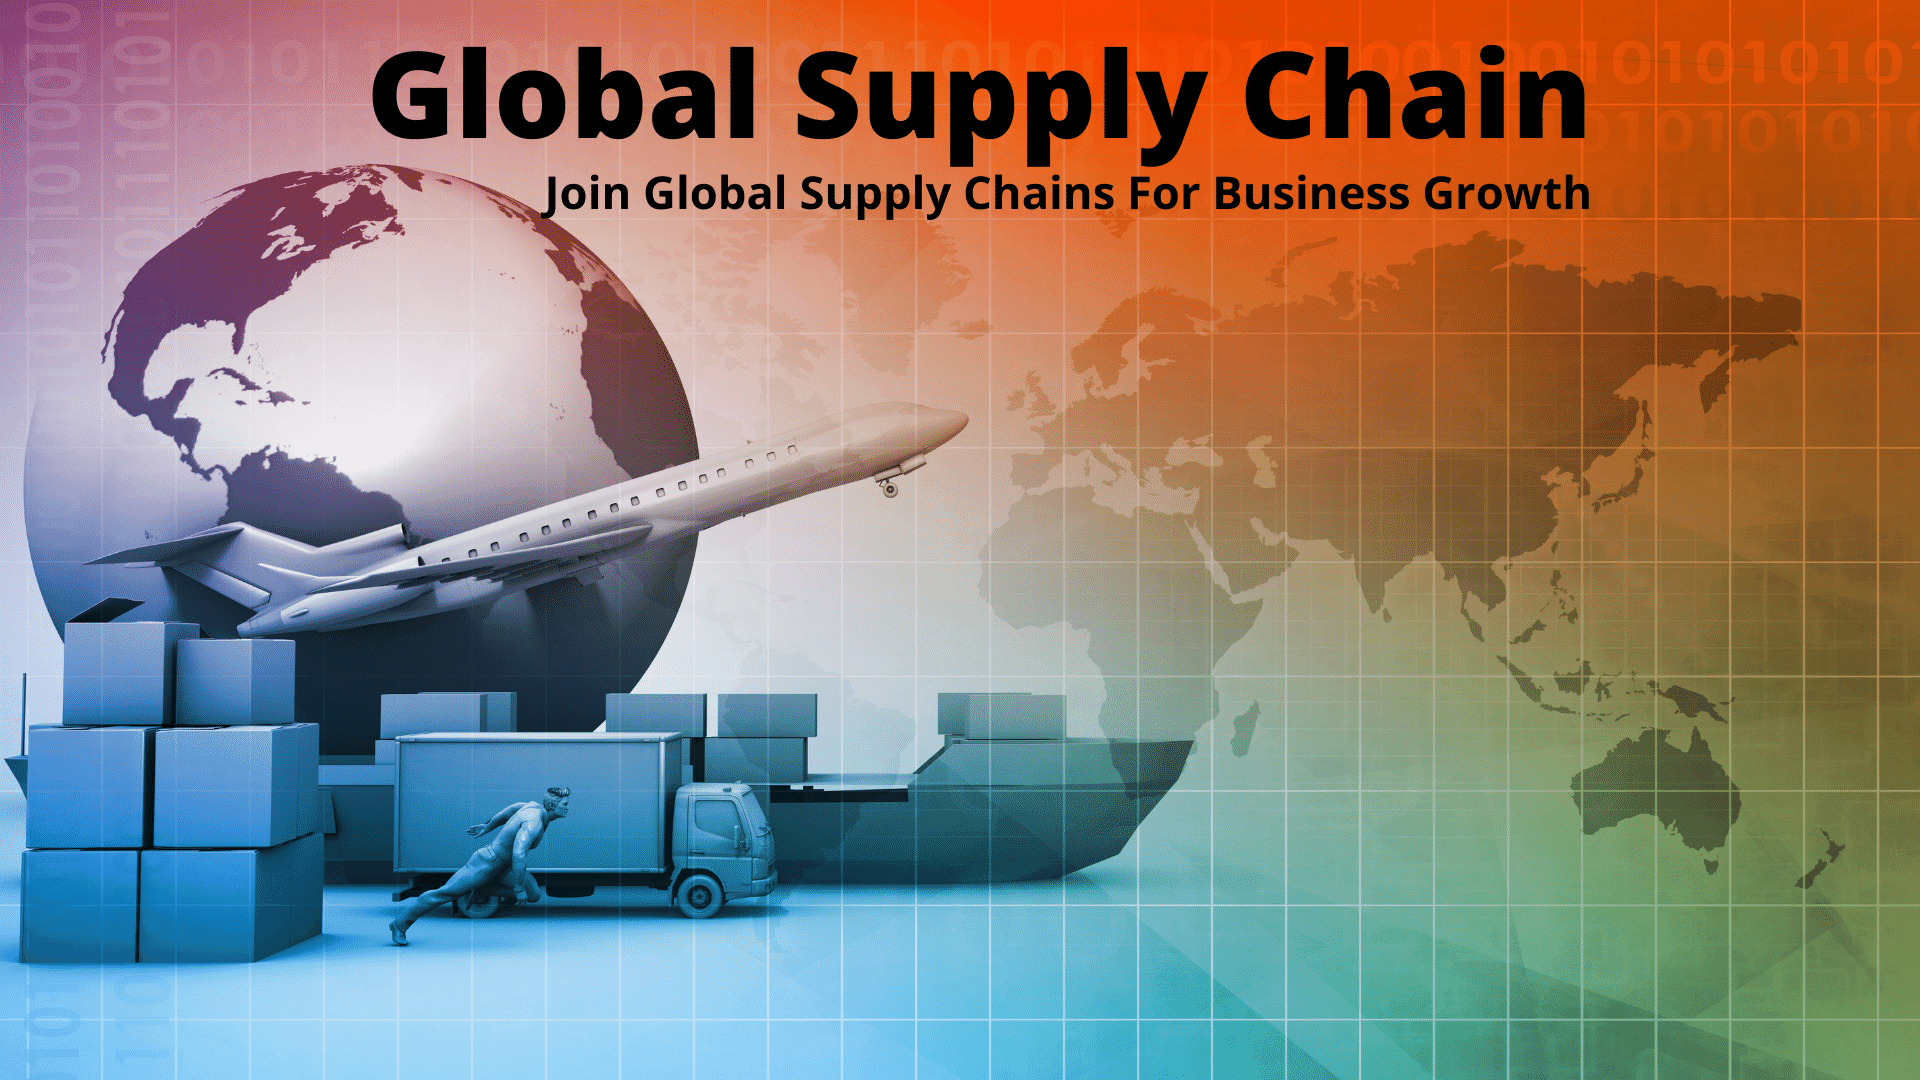 Global Supply Chain for Business Growth